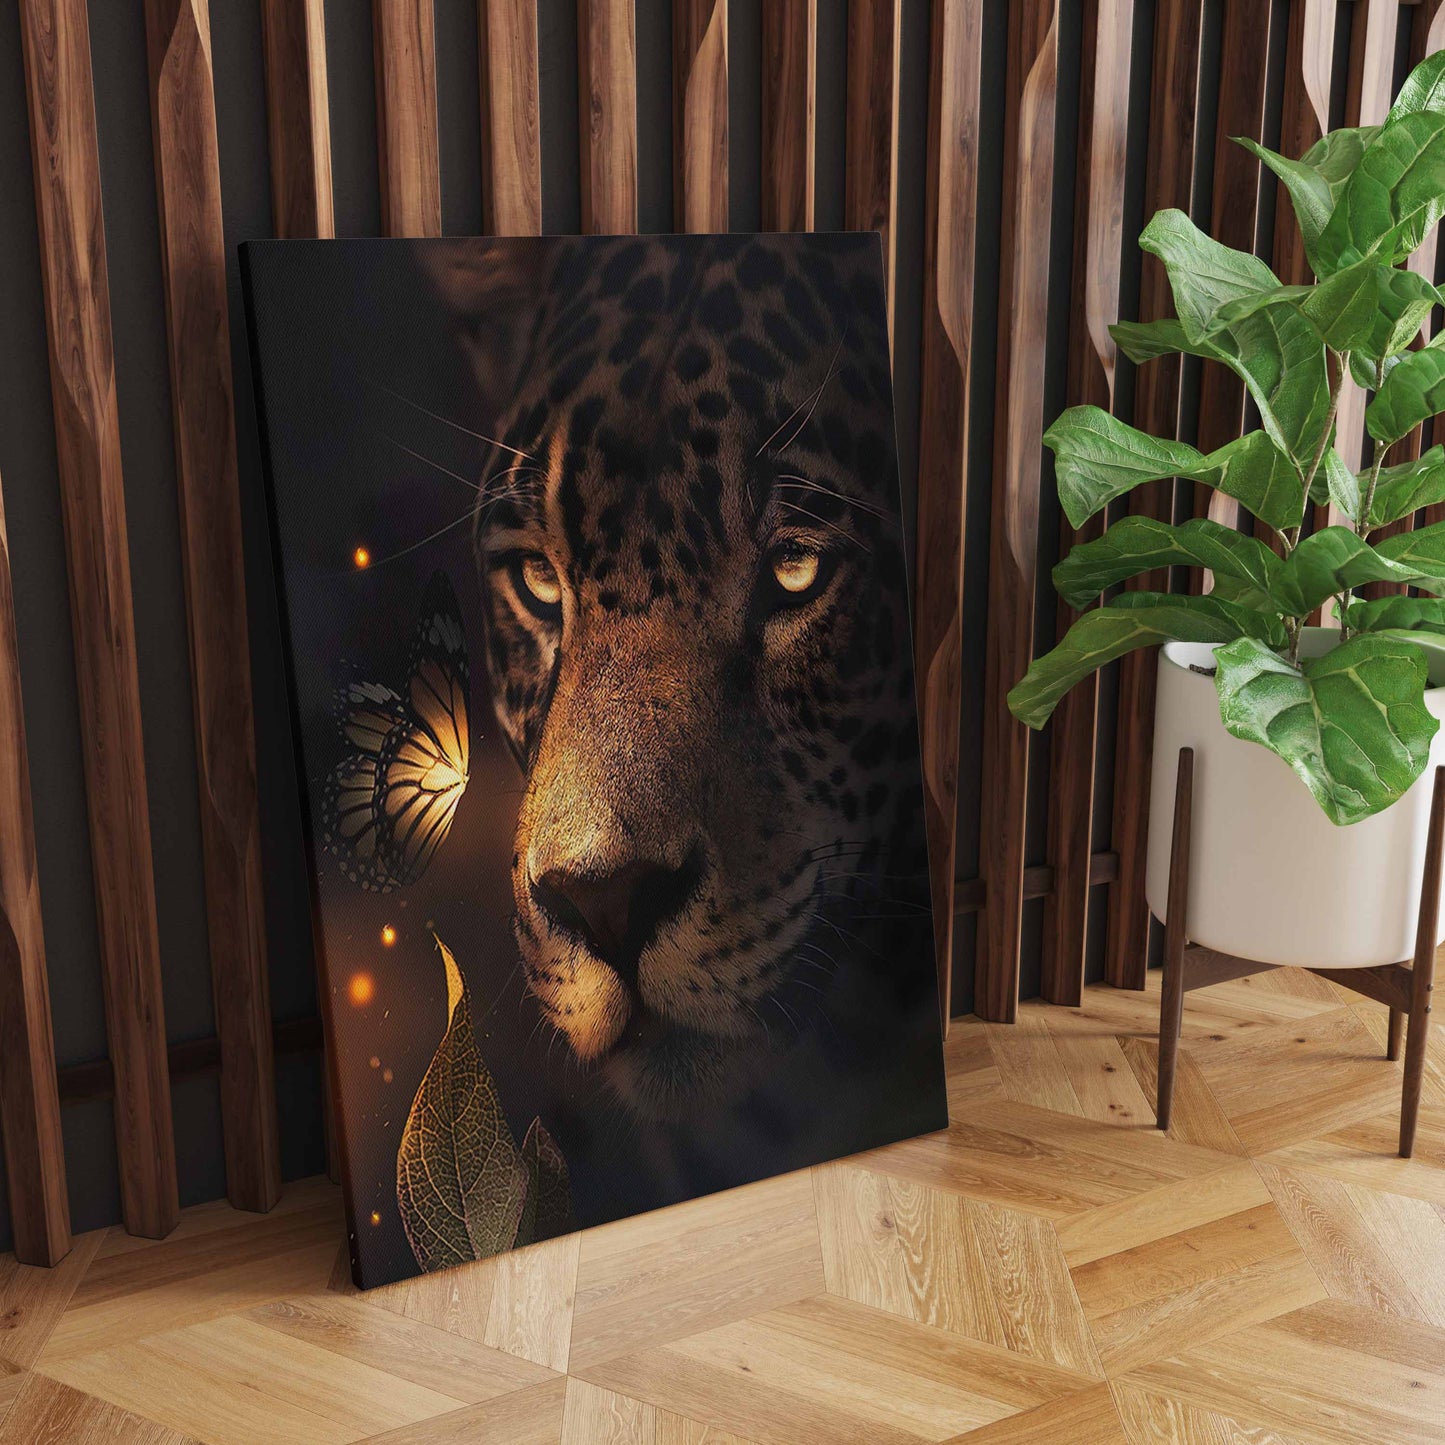 Whimsical Nordic Wildlife, Adorable Lion, Tiger, and Leopard Poster for Playful Home Decor in Bedrooms, Corridors, and Living Spaces S04E10